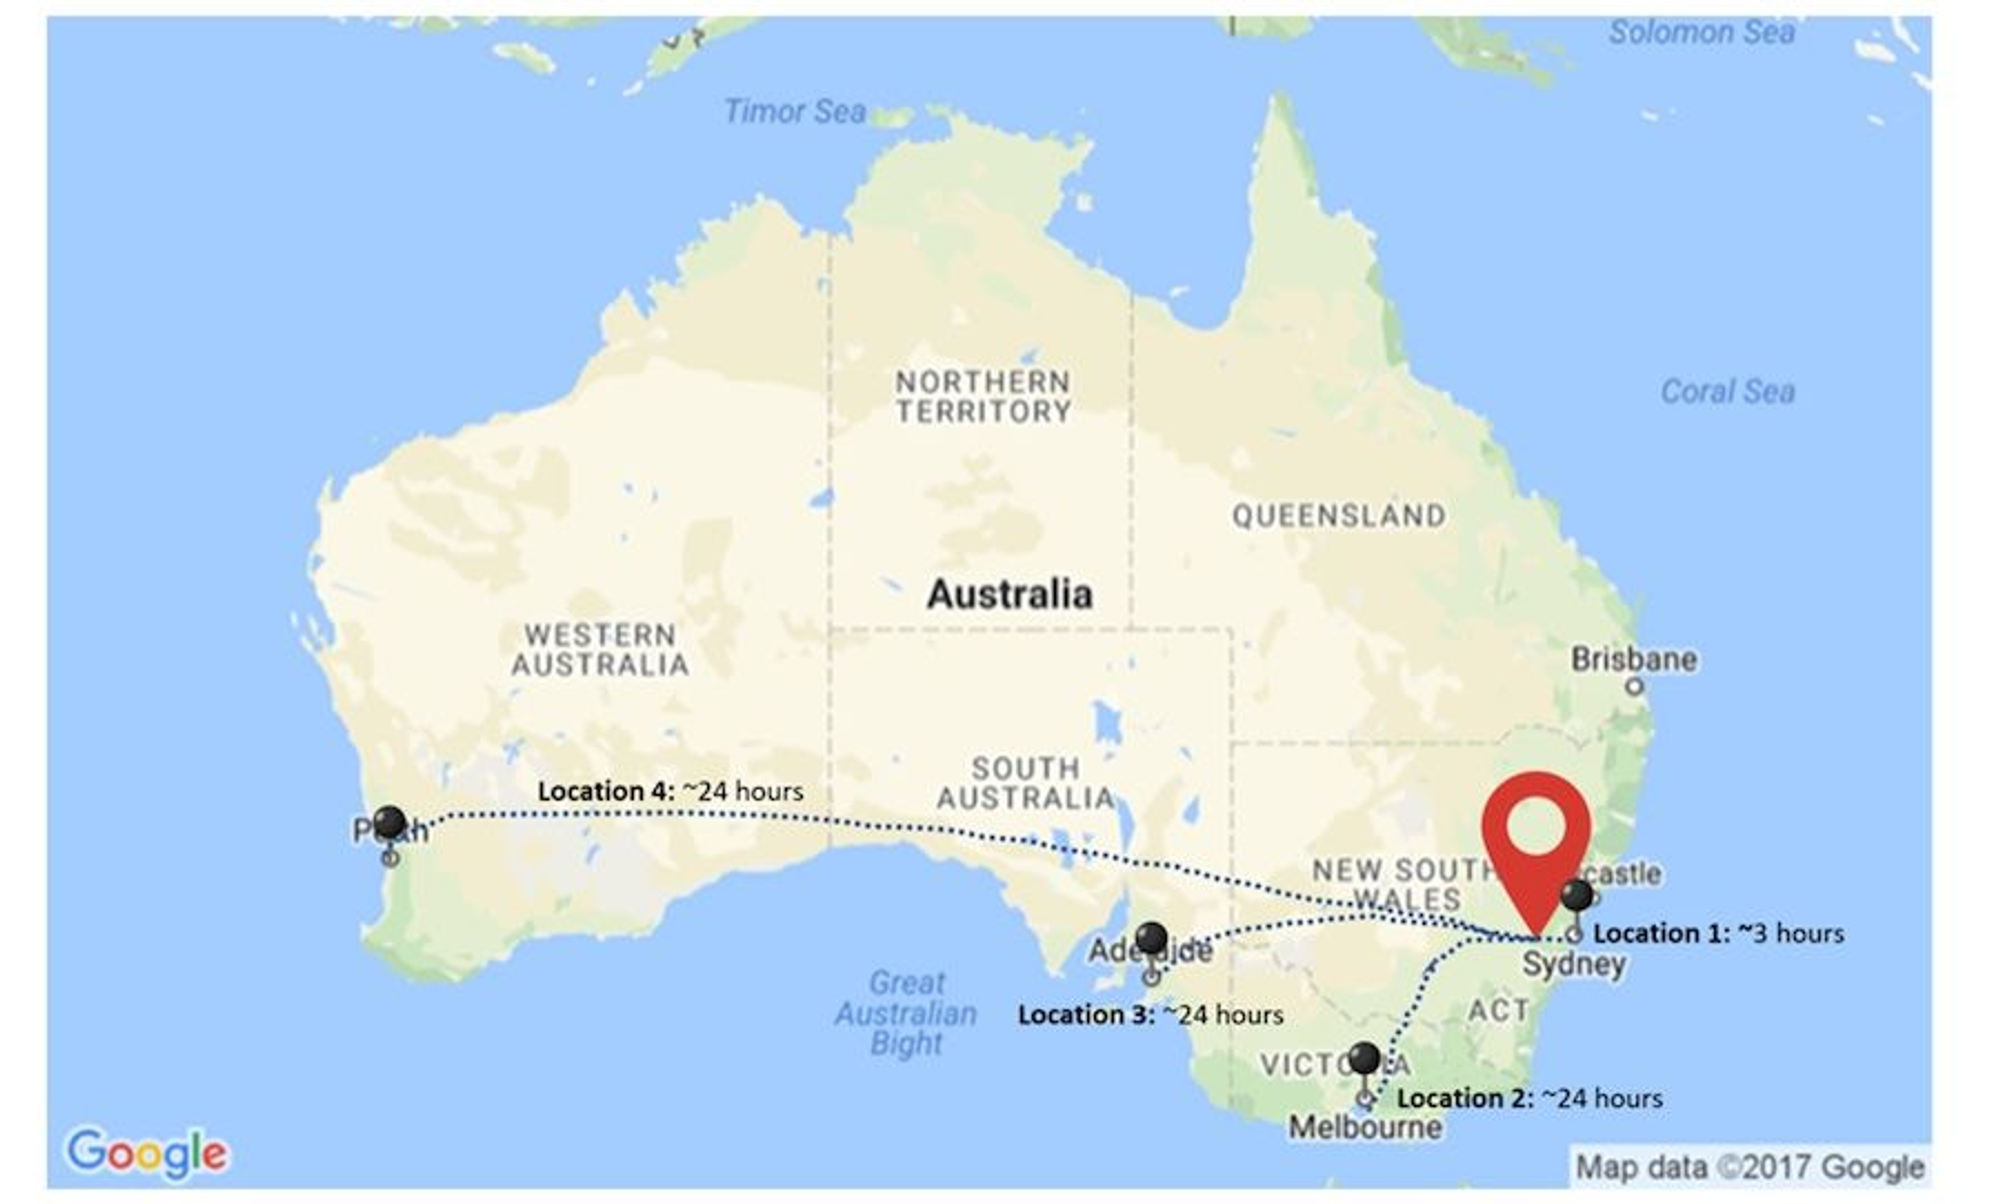 Figure 3. Shipment times of Pae7 to Phage Australia network. The red location pin shows the approximate location of Westmead Institute for Medical Research, NSW, where Pae7 was shipped from. The black location pins show the 4 locations that received Pae7; Location 1: The University of Sydney, NSW, Location 2: Monash University, VIC, Location 3: Flinders University, SA, Location 4: Telethon Kids Institute, WA.